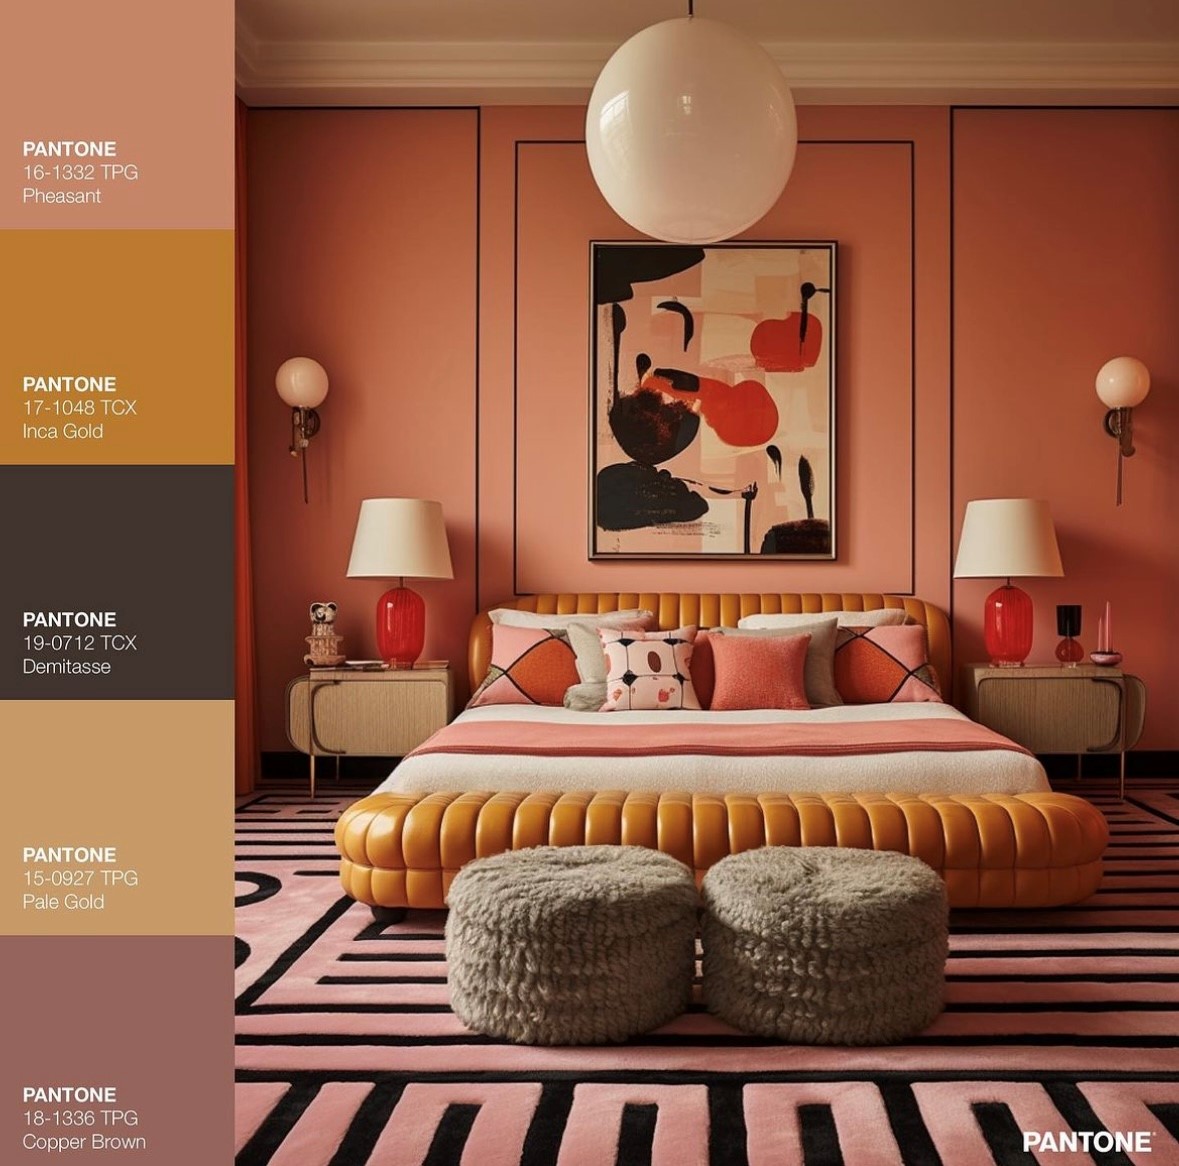 AI generated image of bedroom with large yellow bed in the centre, decorated with geometric patterned cushions, an abstract piece of art on the paneled walls. To the left of the image are the Pantone colours used in the image.